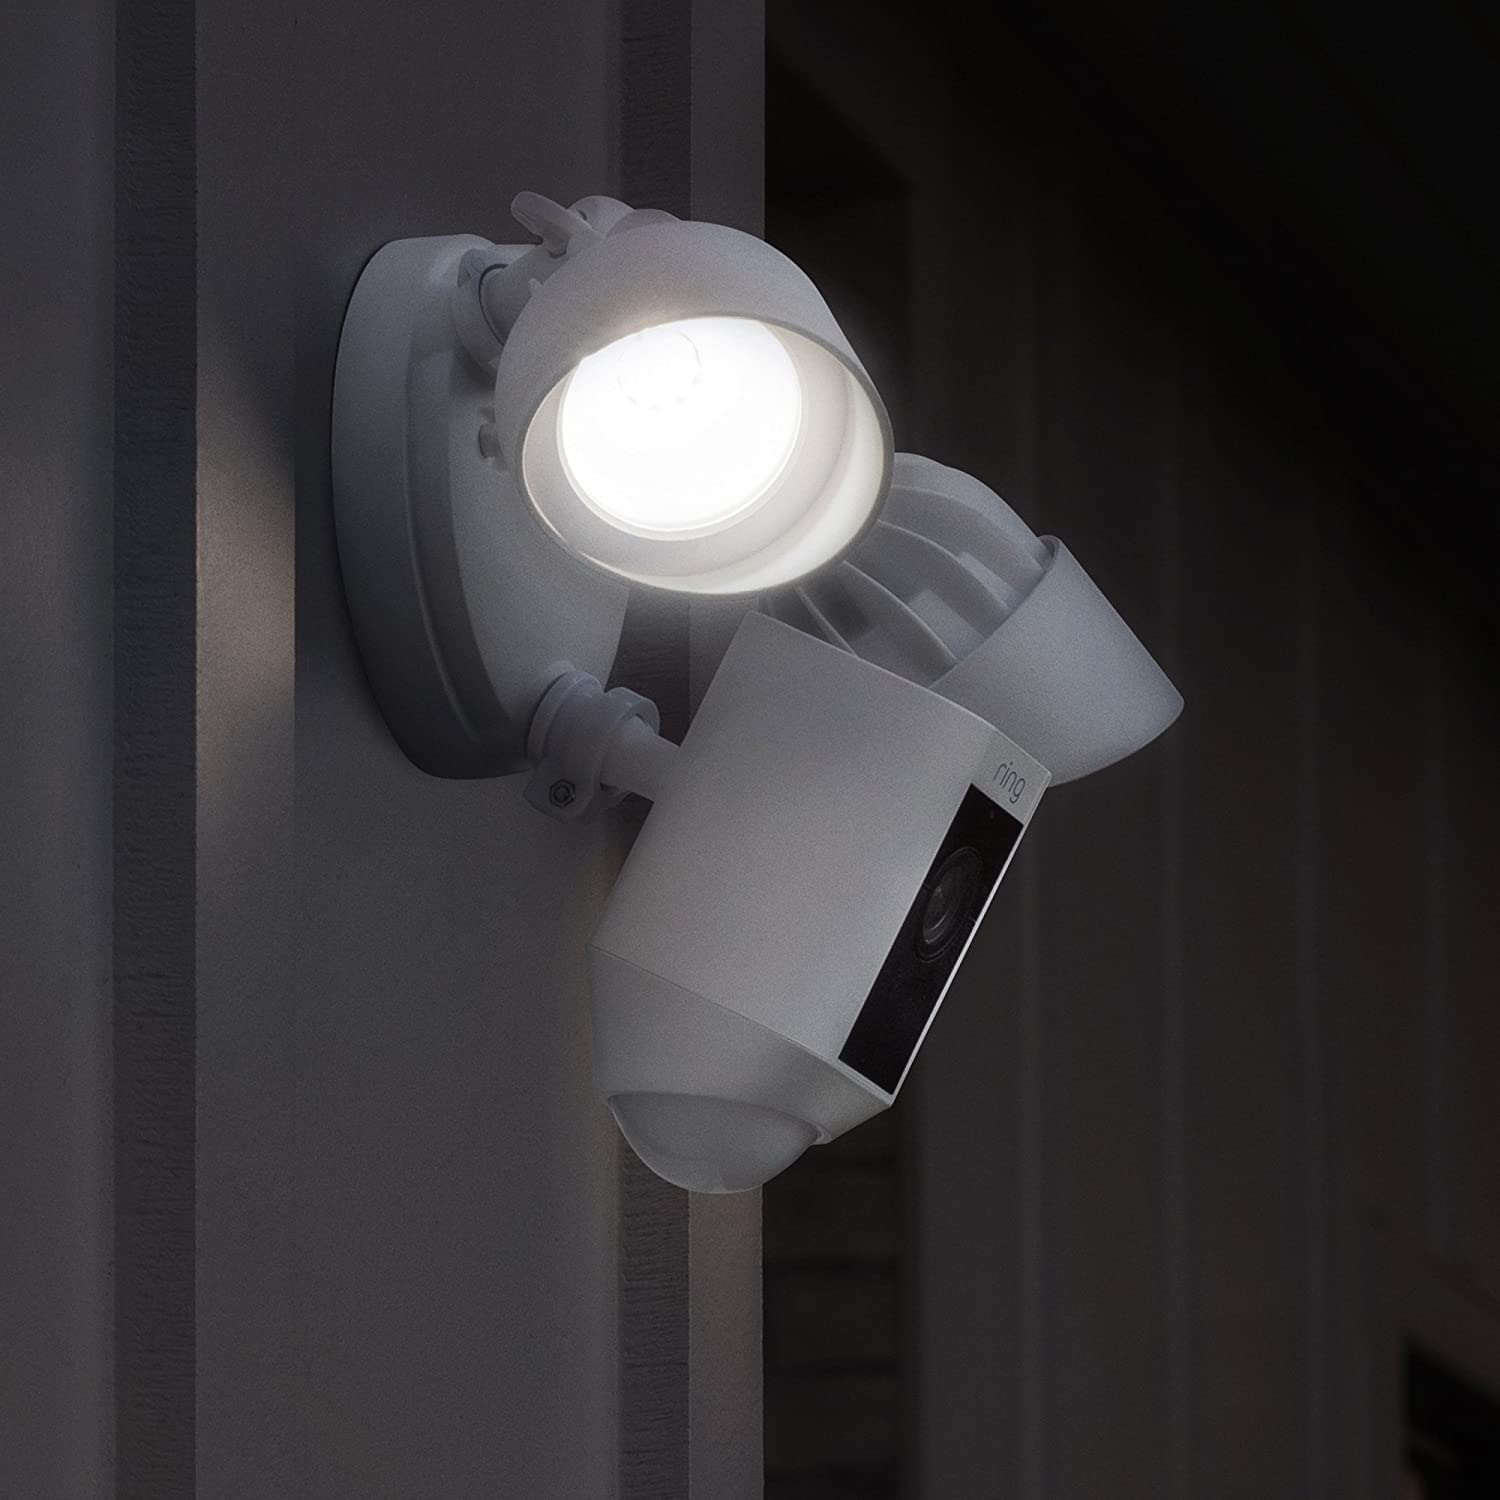 security cameras with motion lights